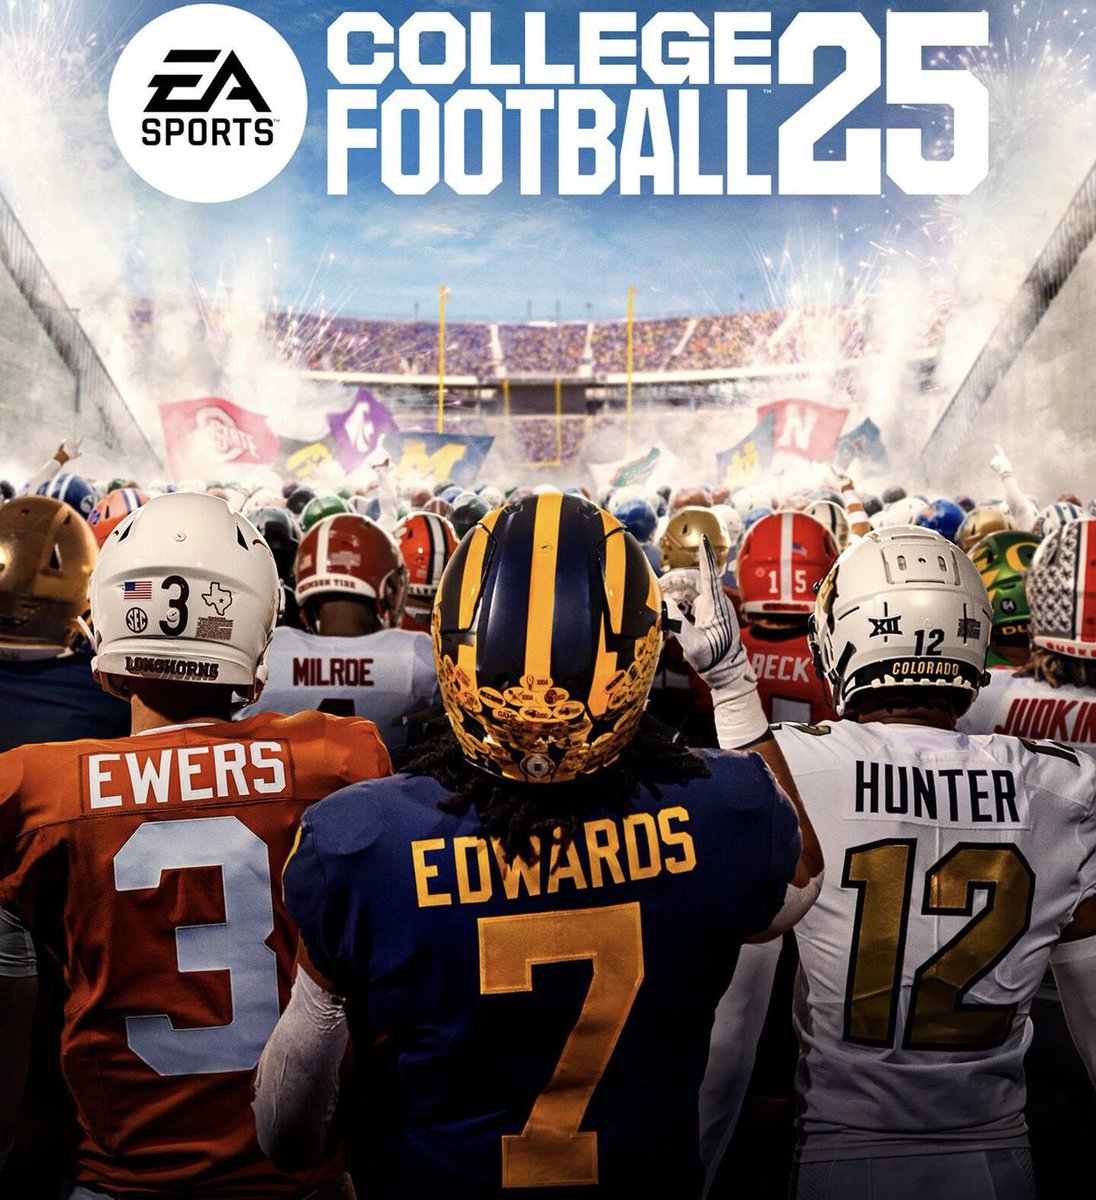 The Deluxe edition cover of EA Sports College Football 25 just dropped!!